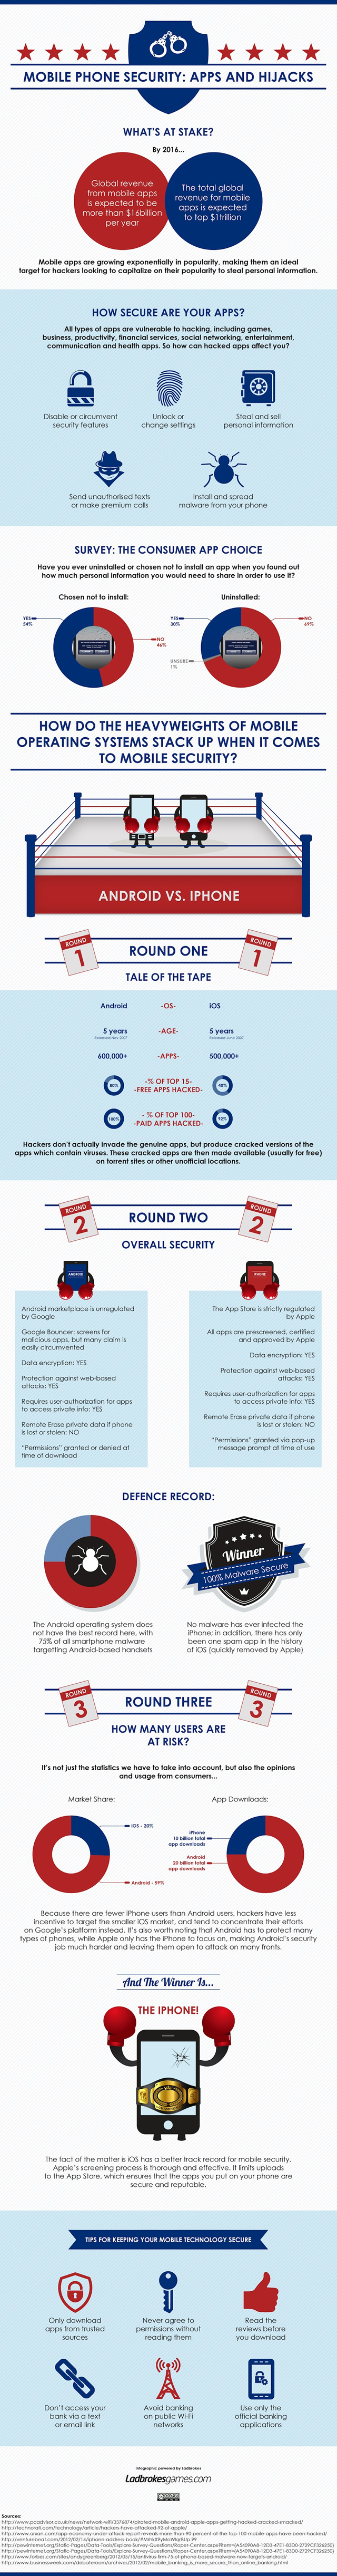 Ladbroke infographic Apple vs Android security